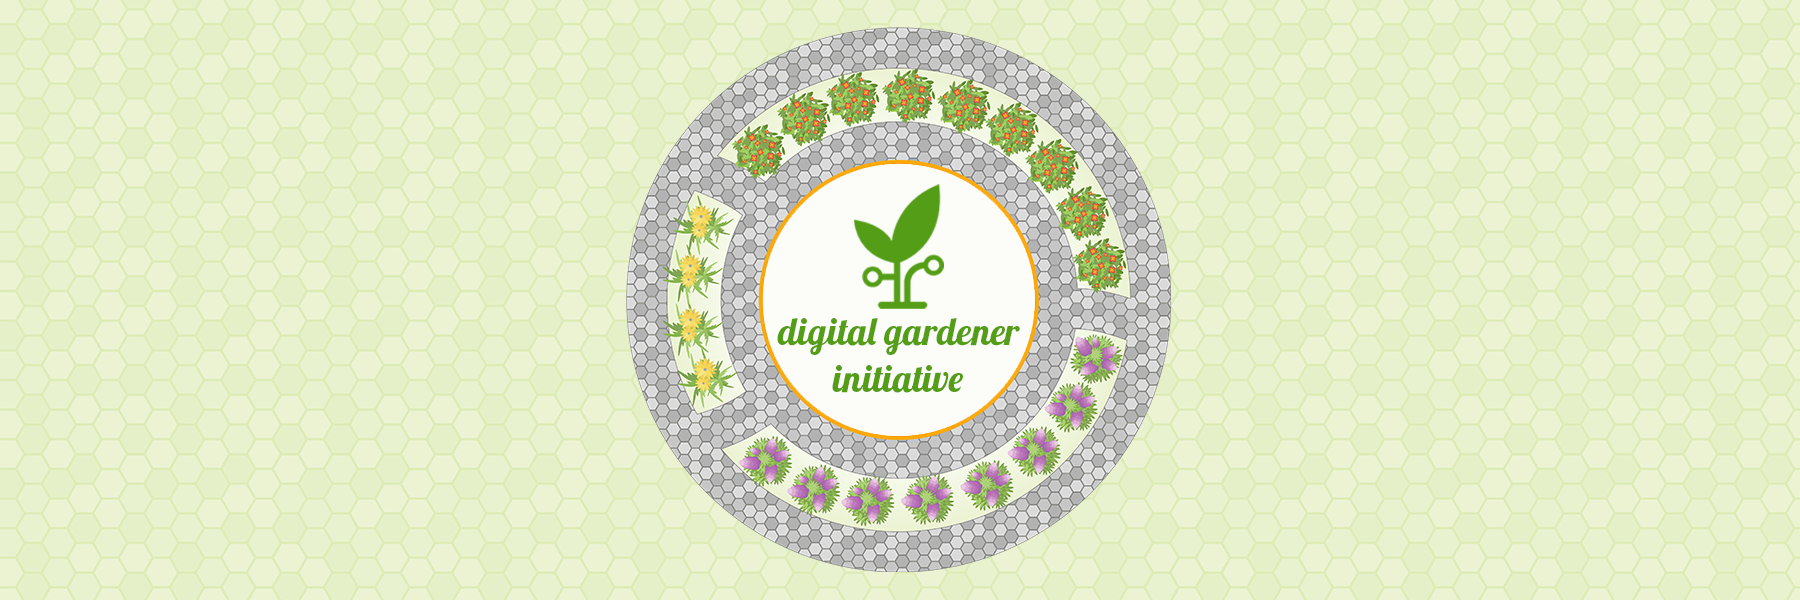 A green honeycomb style background with a circular image of a garden, with a green plant that is part of the Digital Gardener Initiative logo.